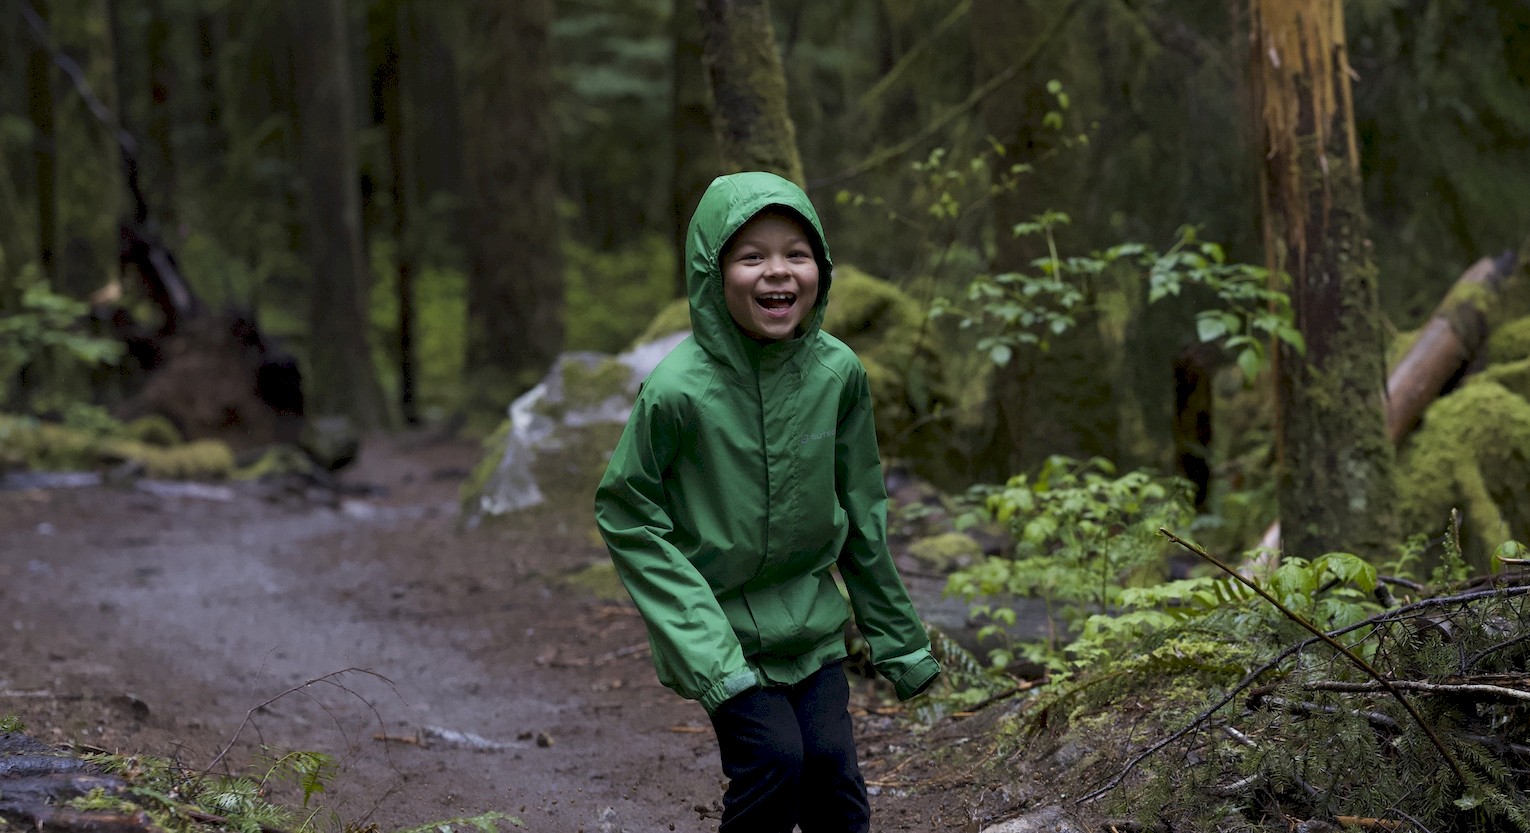 Child splashing in puddles in the forest